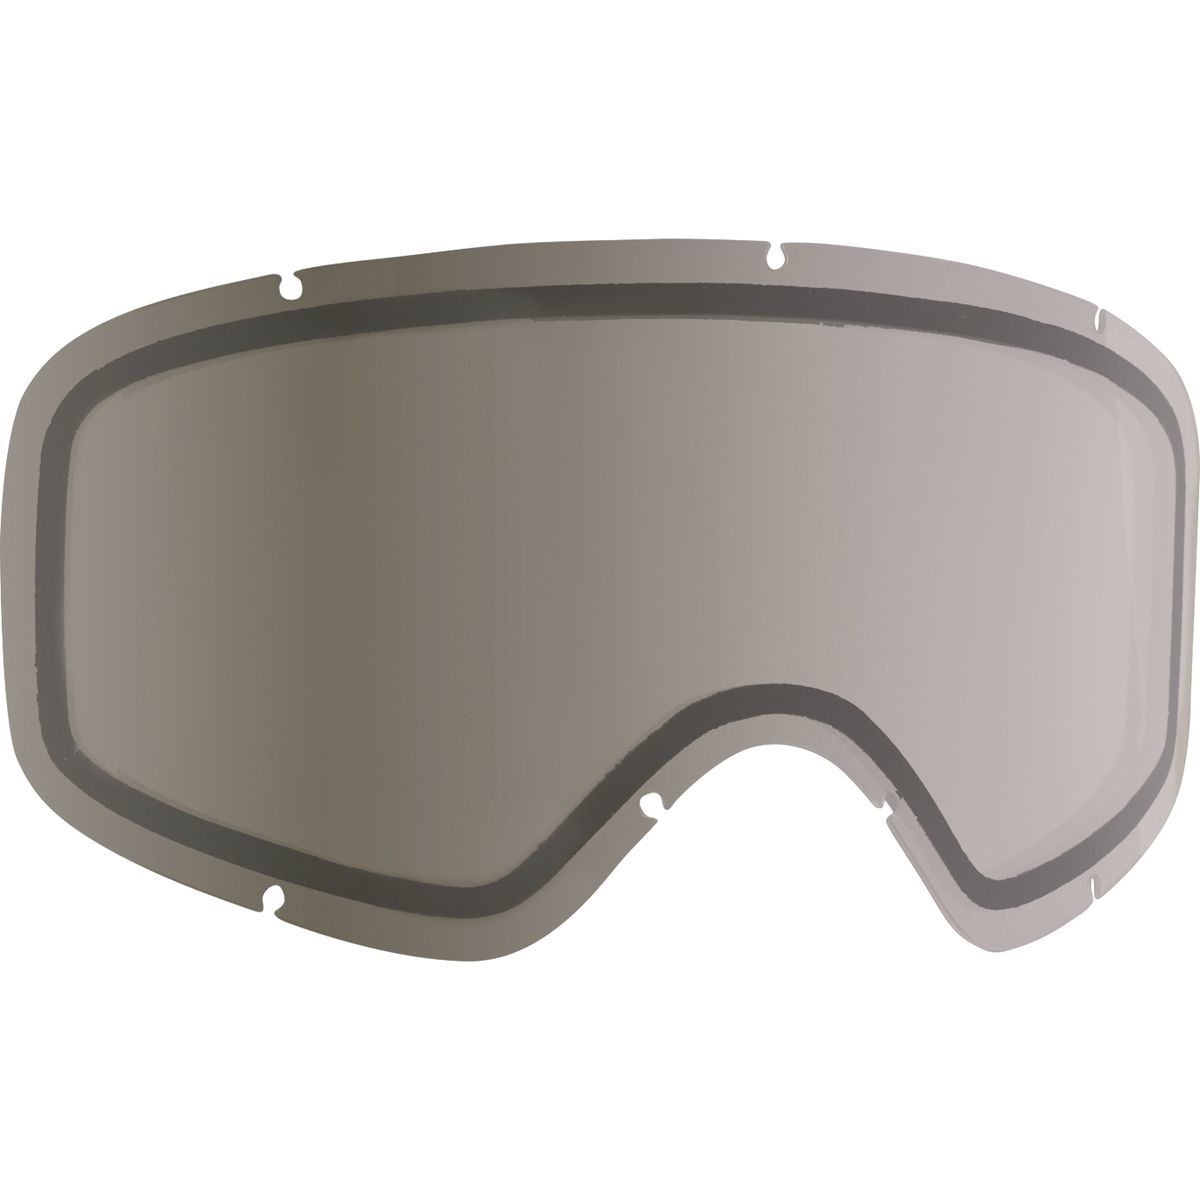 Anon Insight Goggles Replacement Lens - Women's